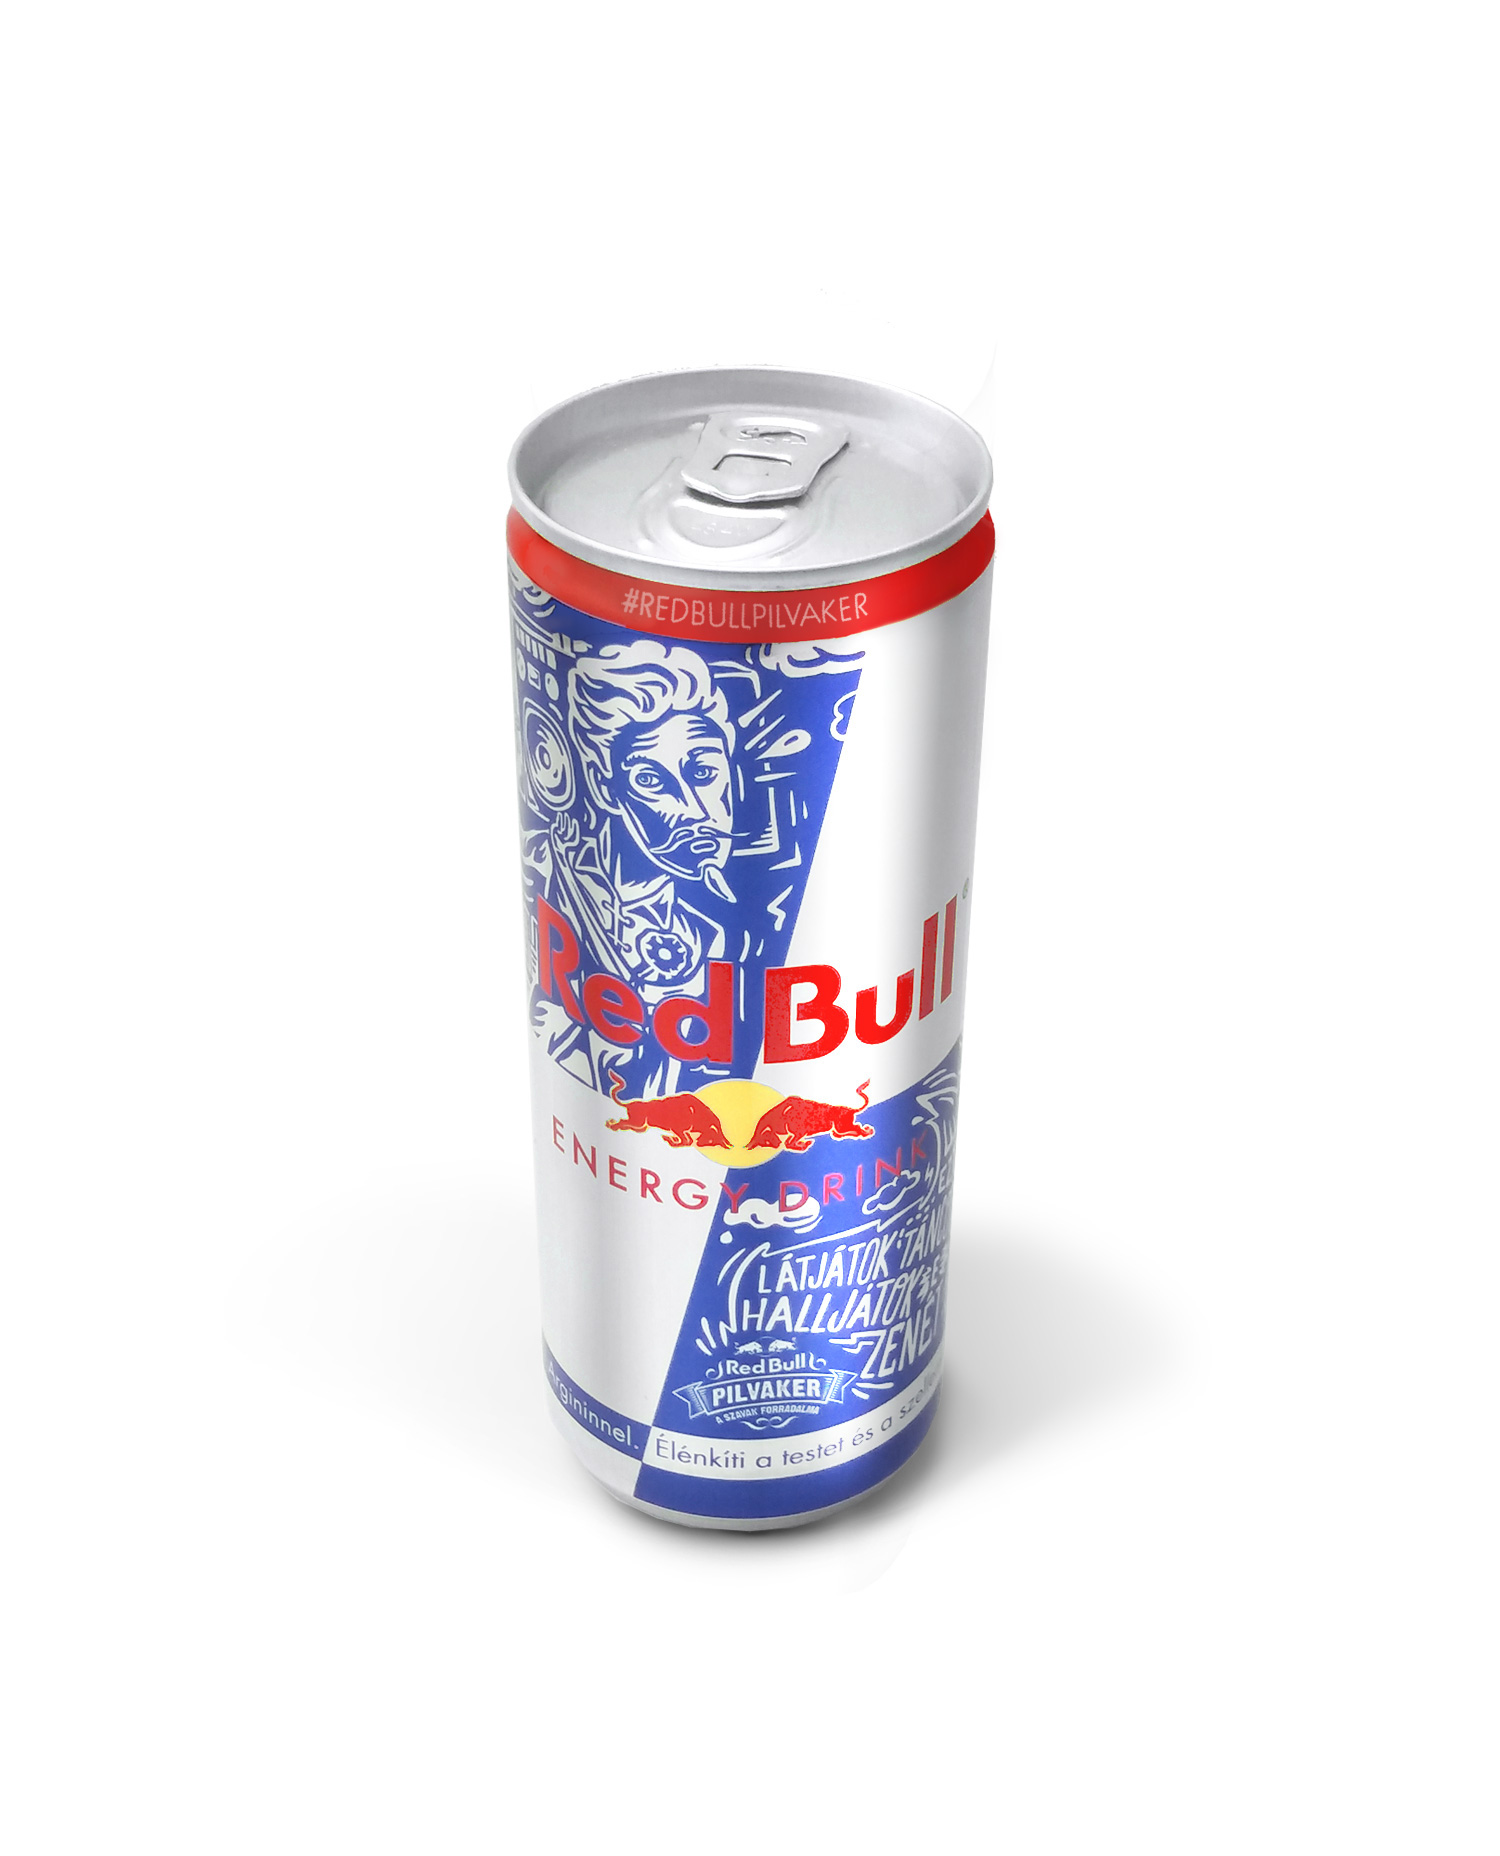 evig replika deltage Red Bull can design on Behance